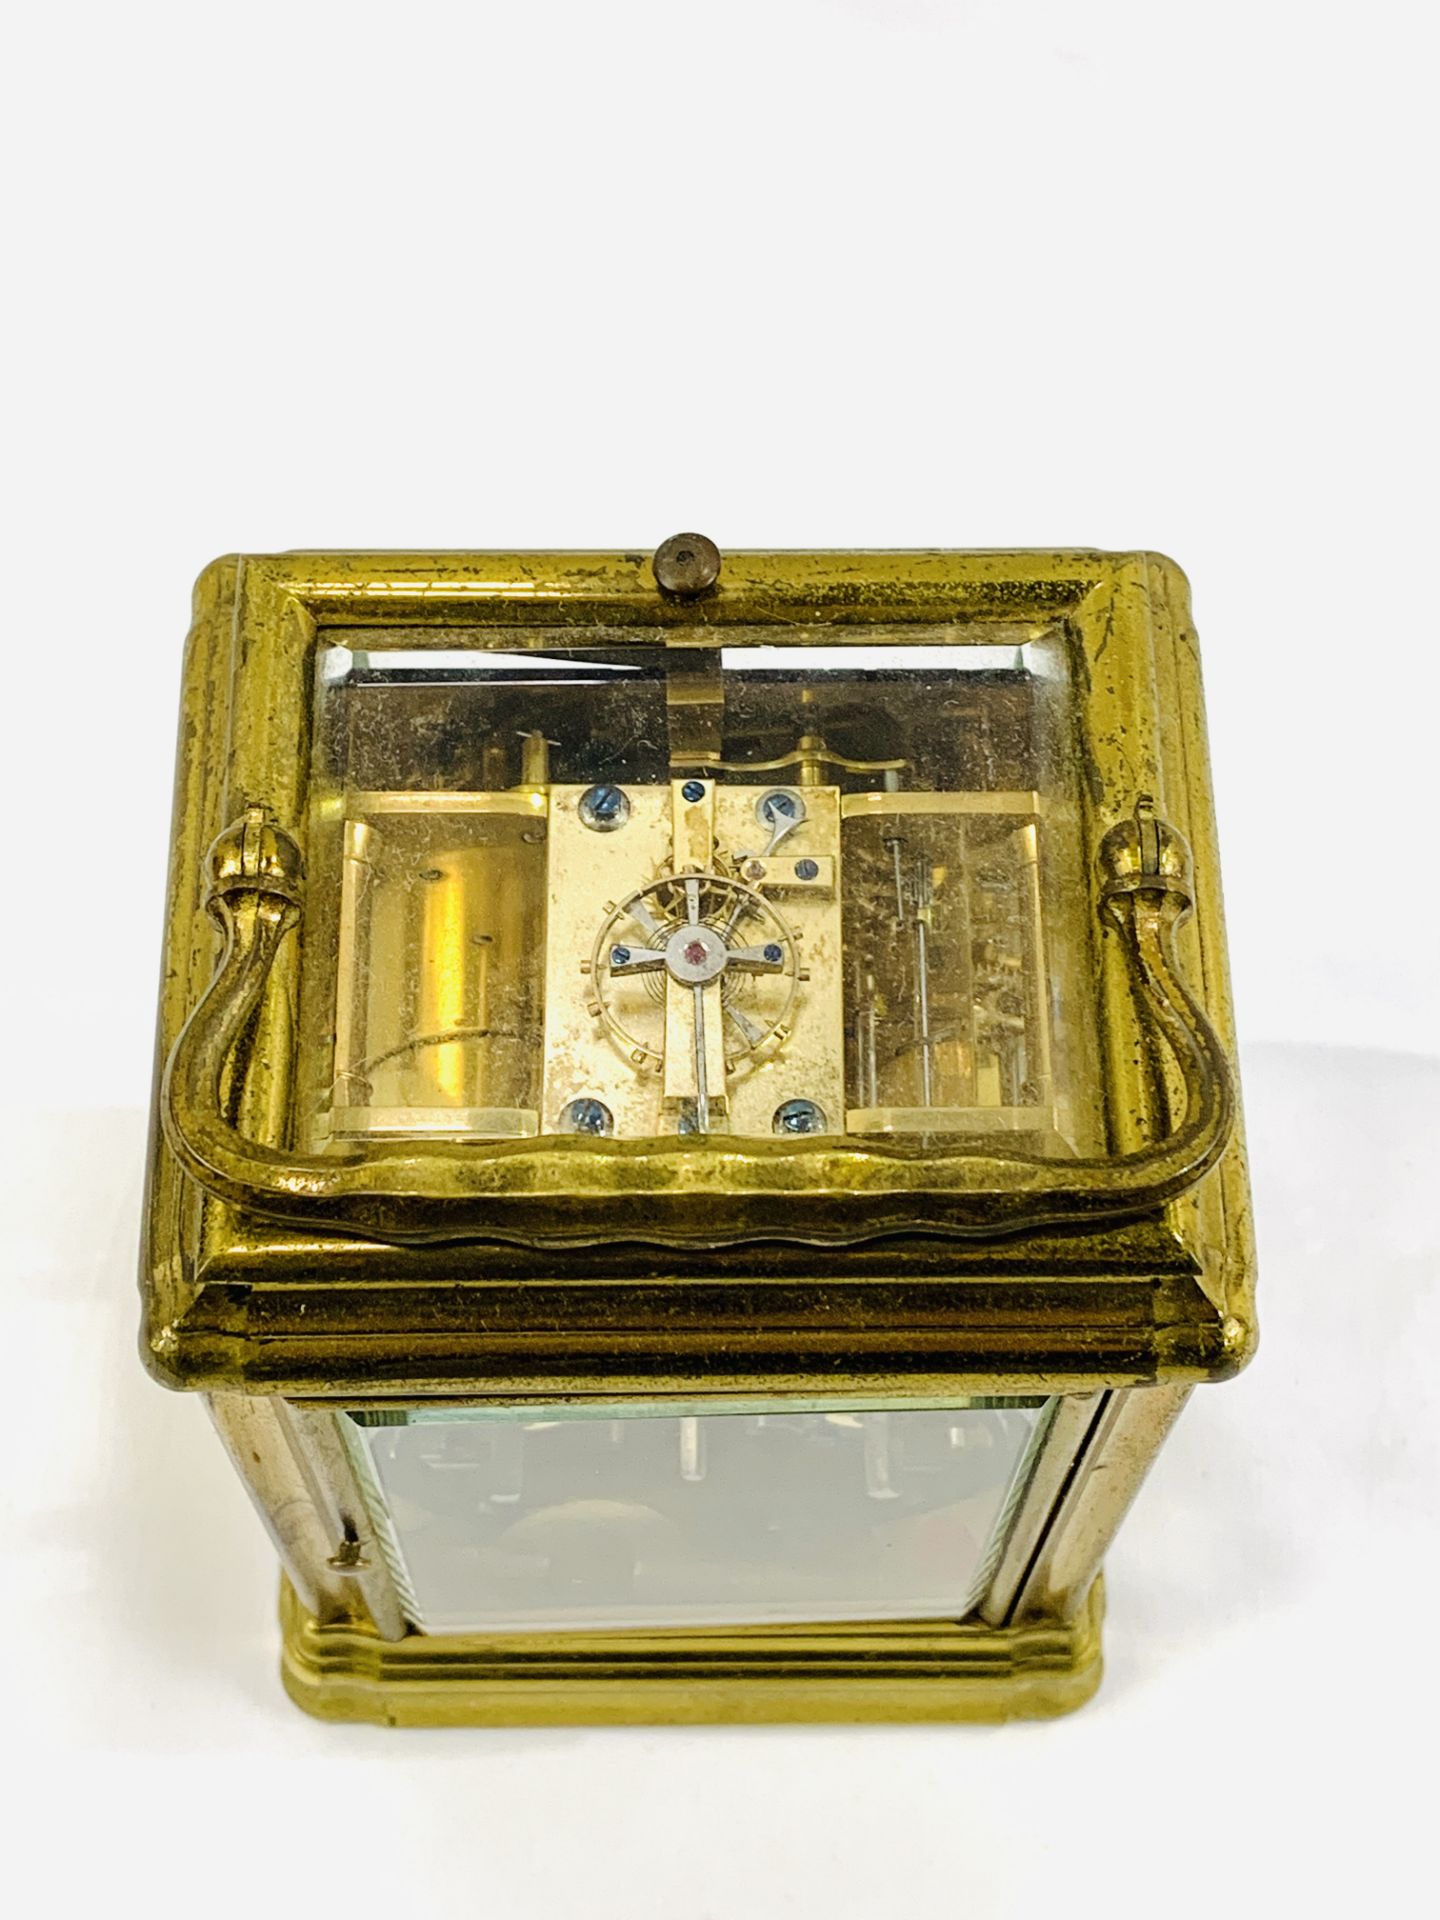 Brass case carriage clock with visible escapement, complete with key - Image 5 of 6